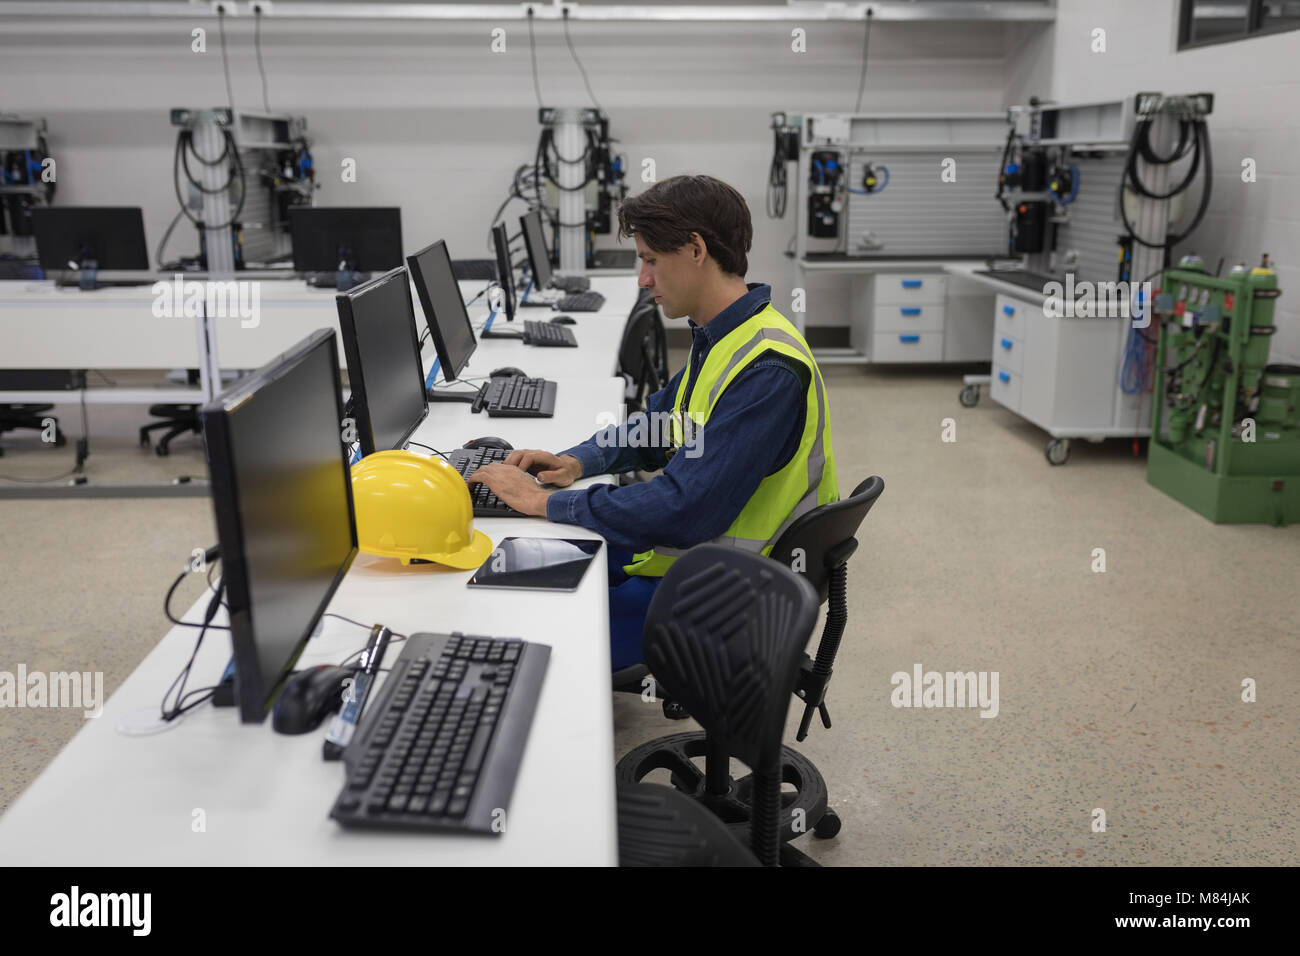 Male worker working on computer Stock Photo